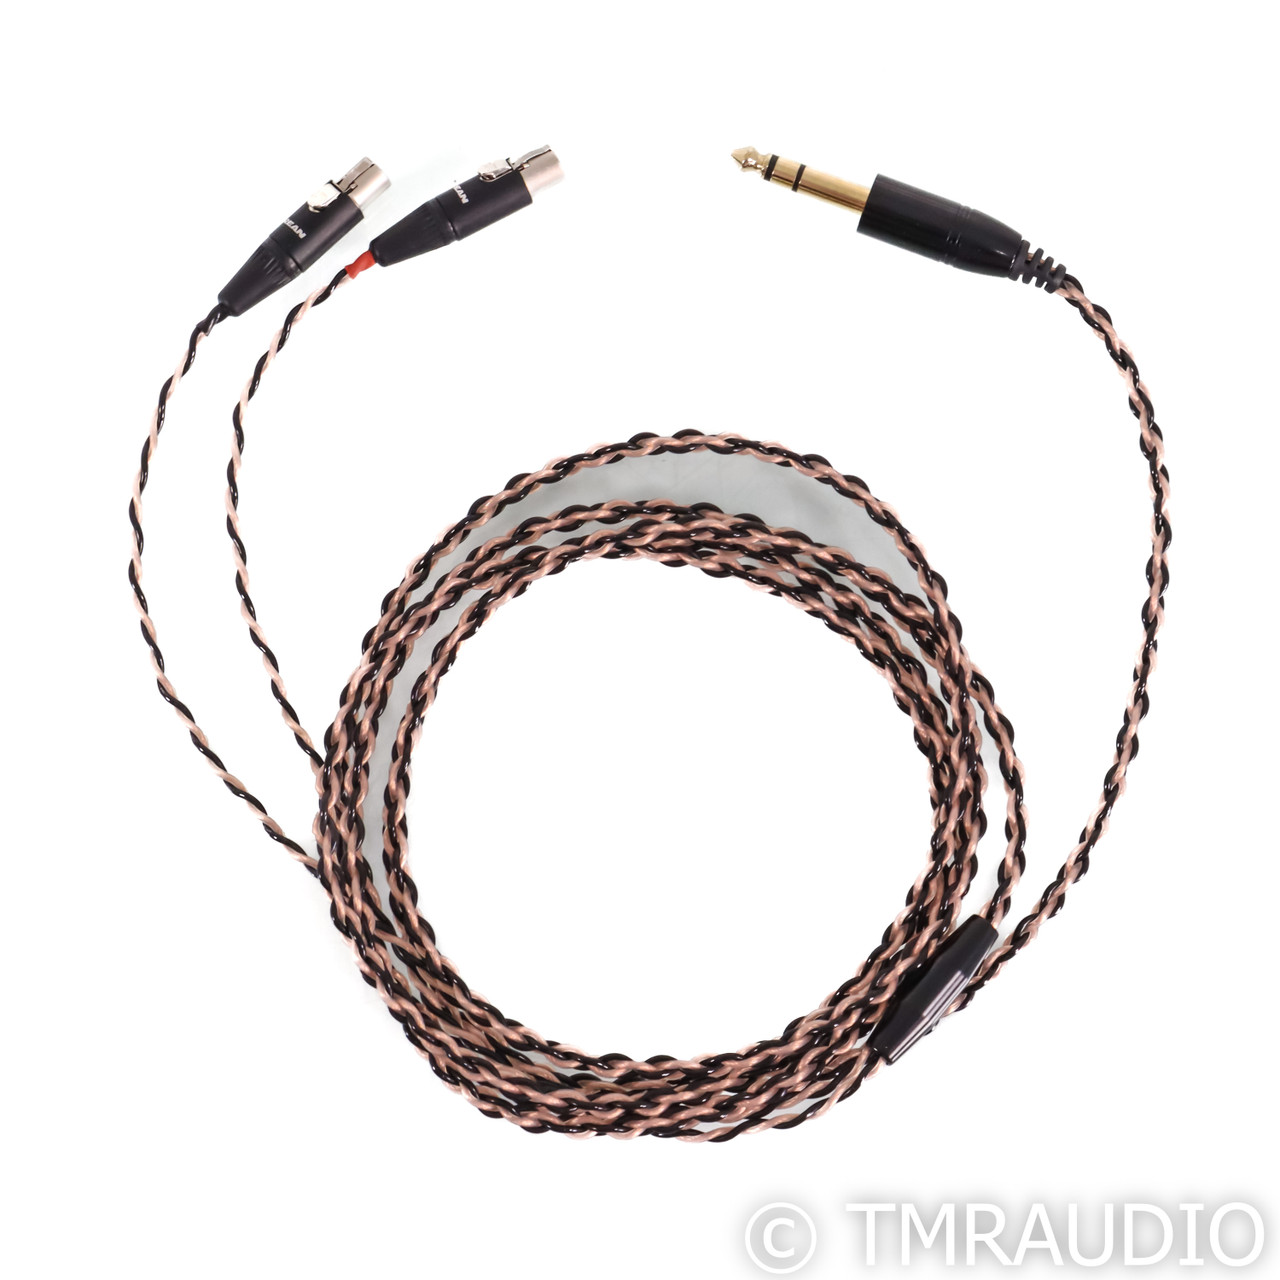 Audeze LCD-4 Premium Braided Cable Headphone Cable; 2.5... 2